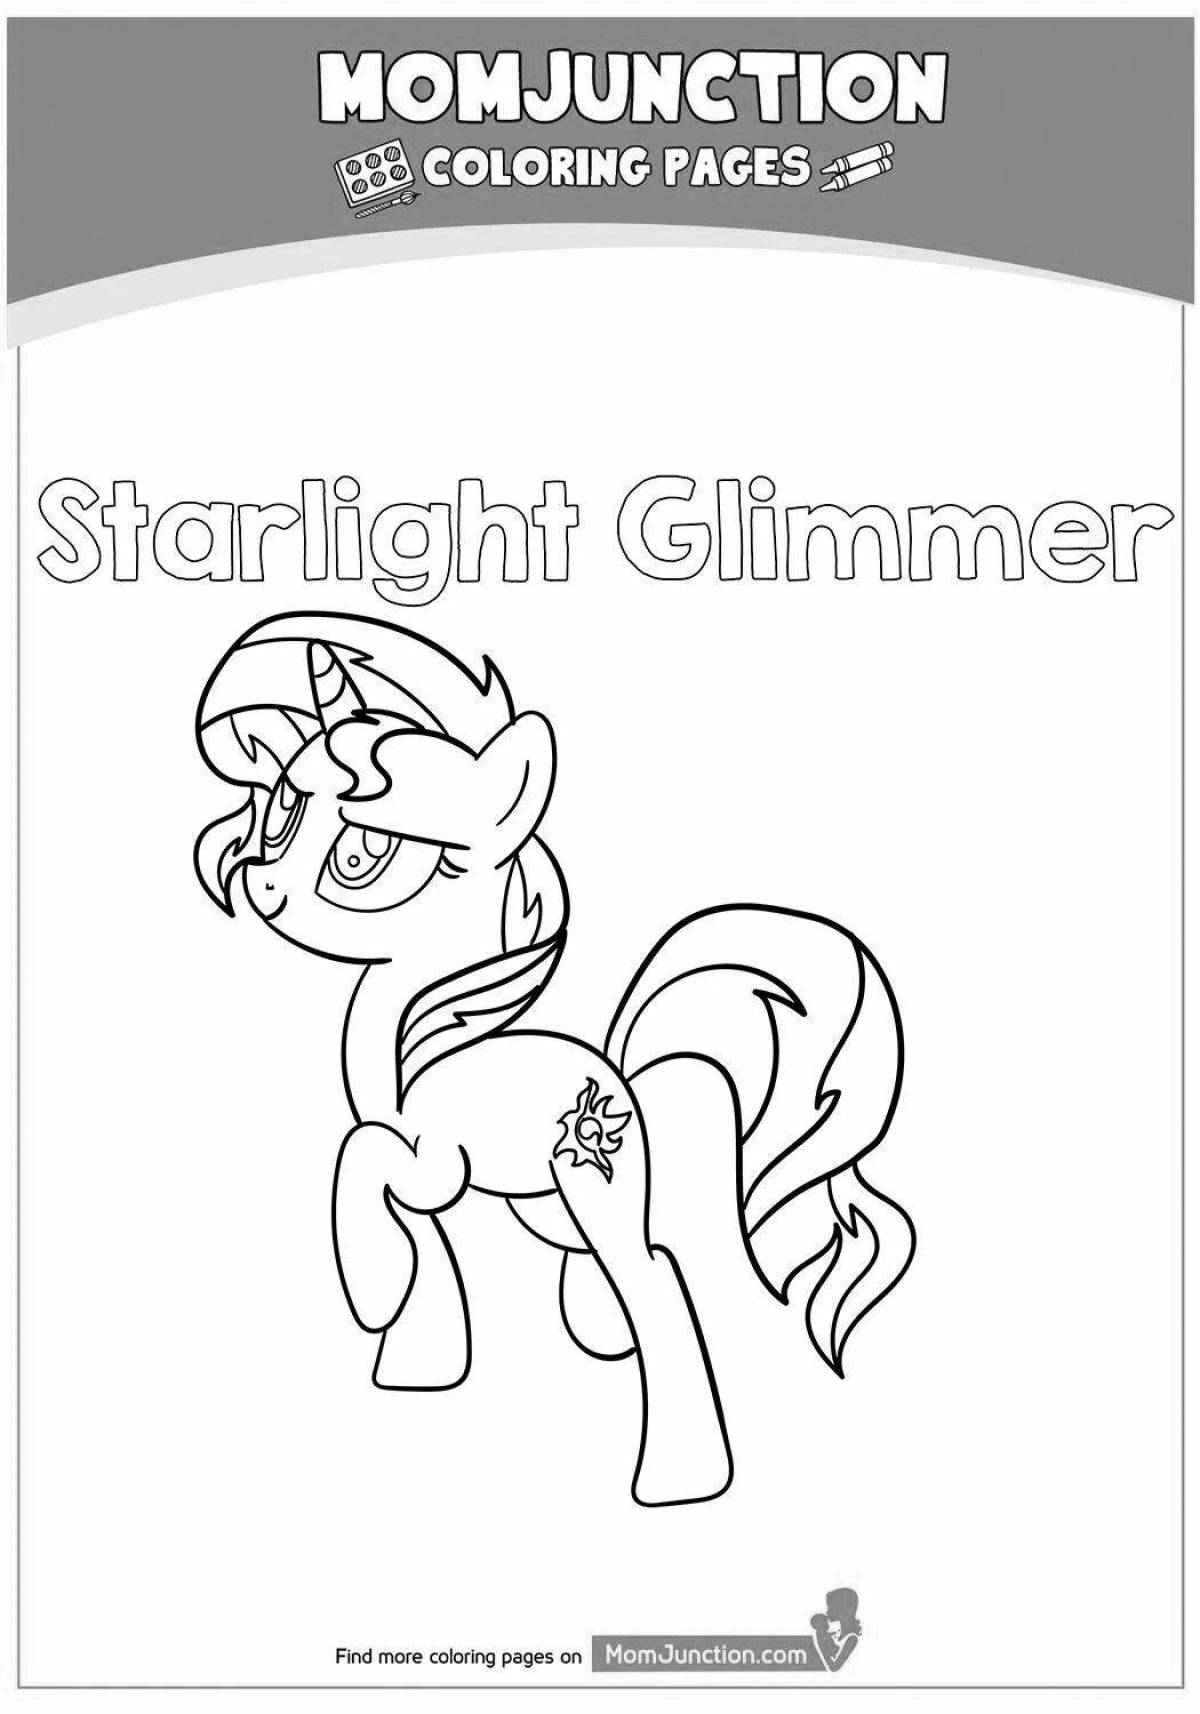 Starlight glimmer coloring page